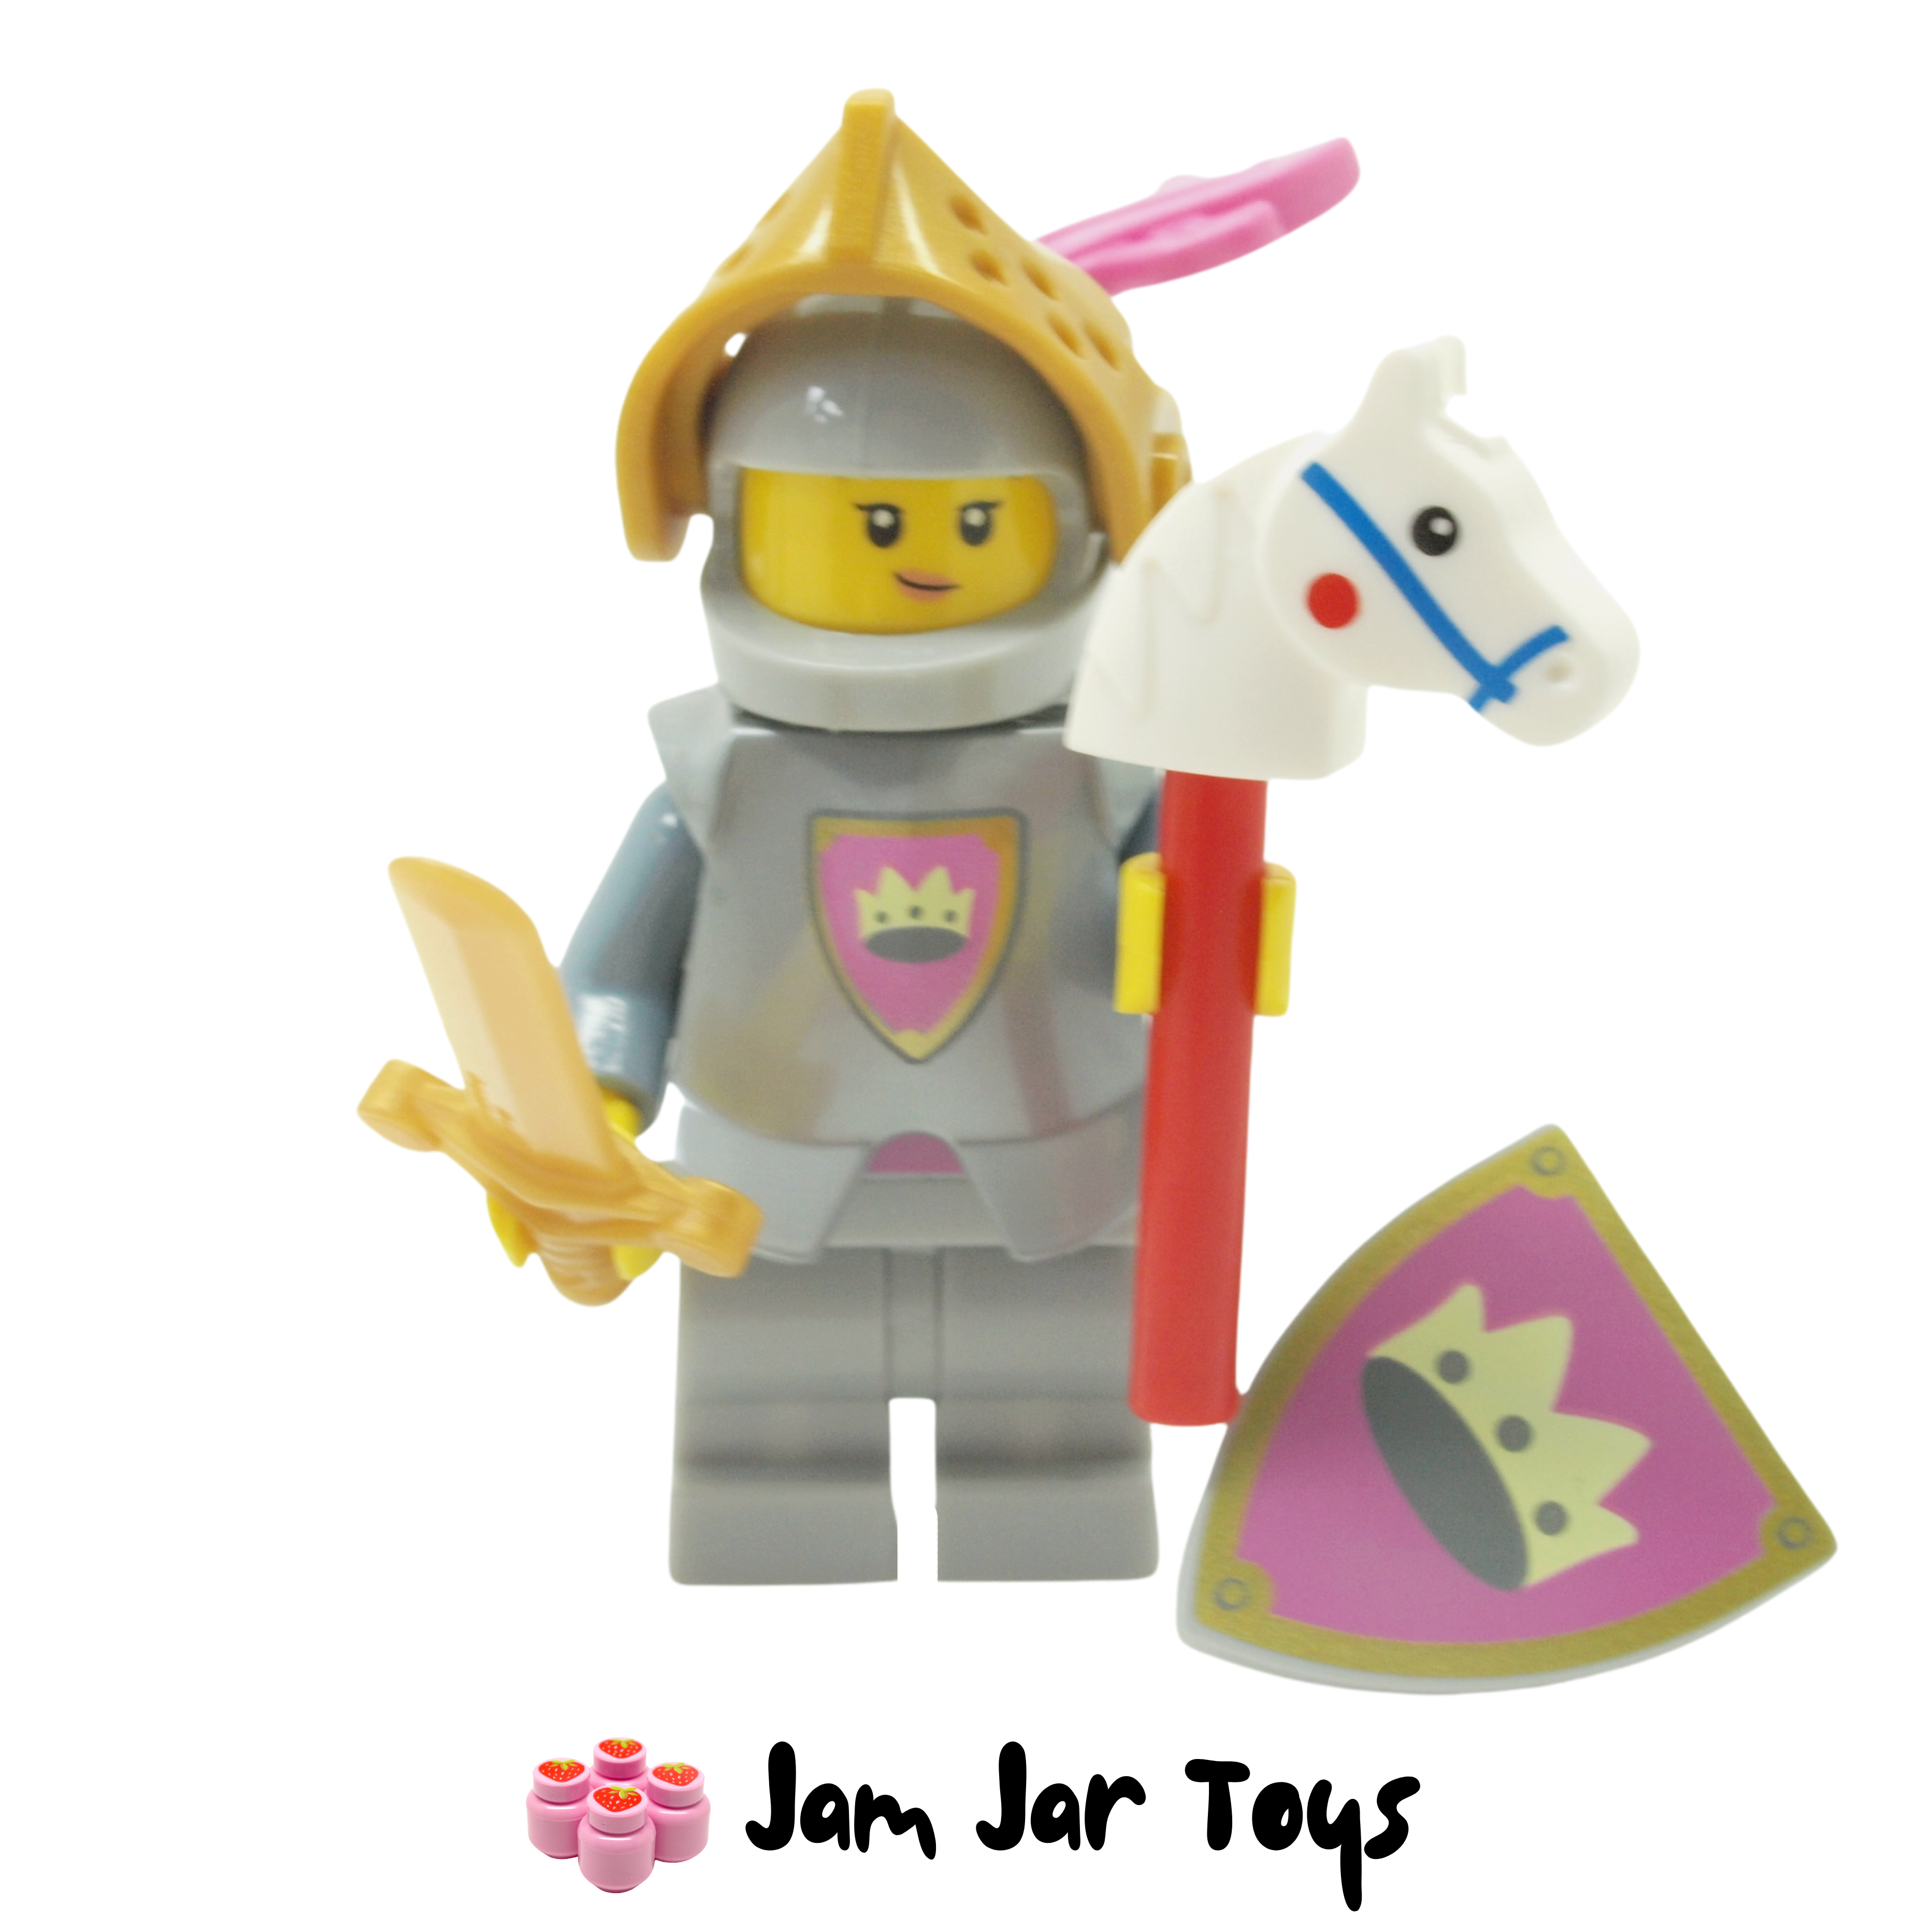 Matematik foran Stramme LEGO Knight of The Yellow Castle Series 23 Minifigure - 71034-11 COL408